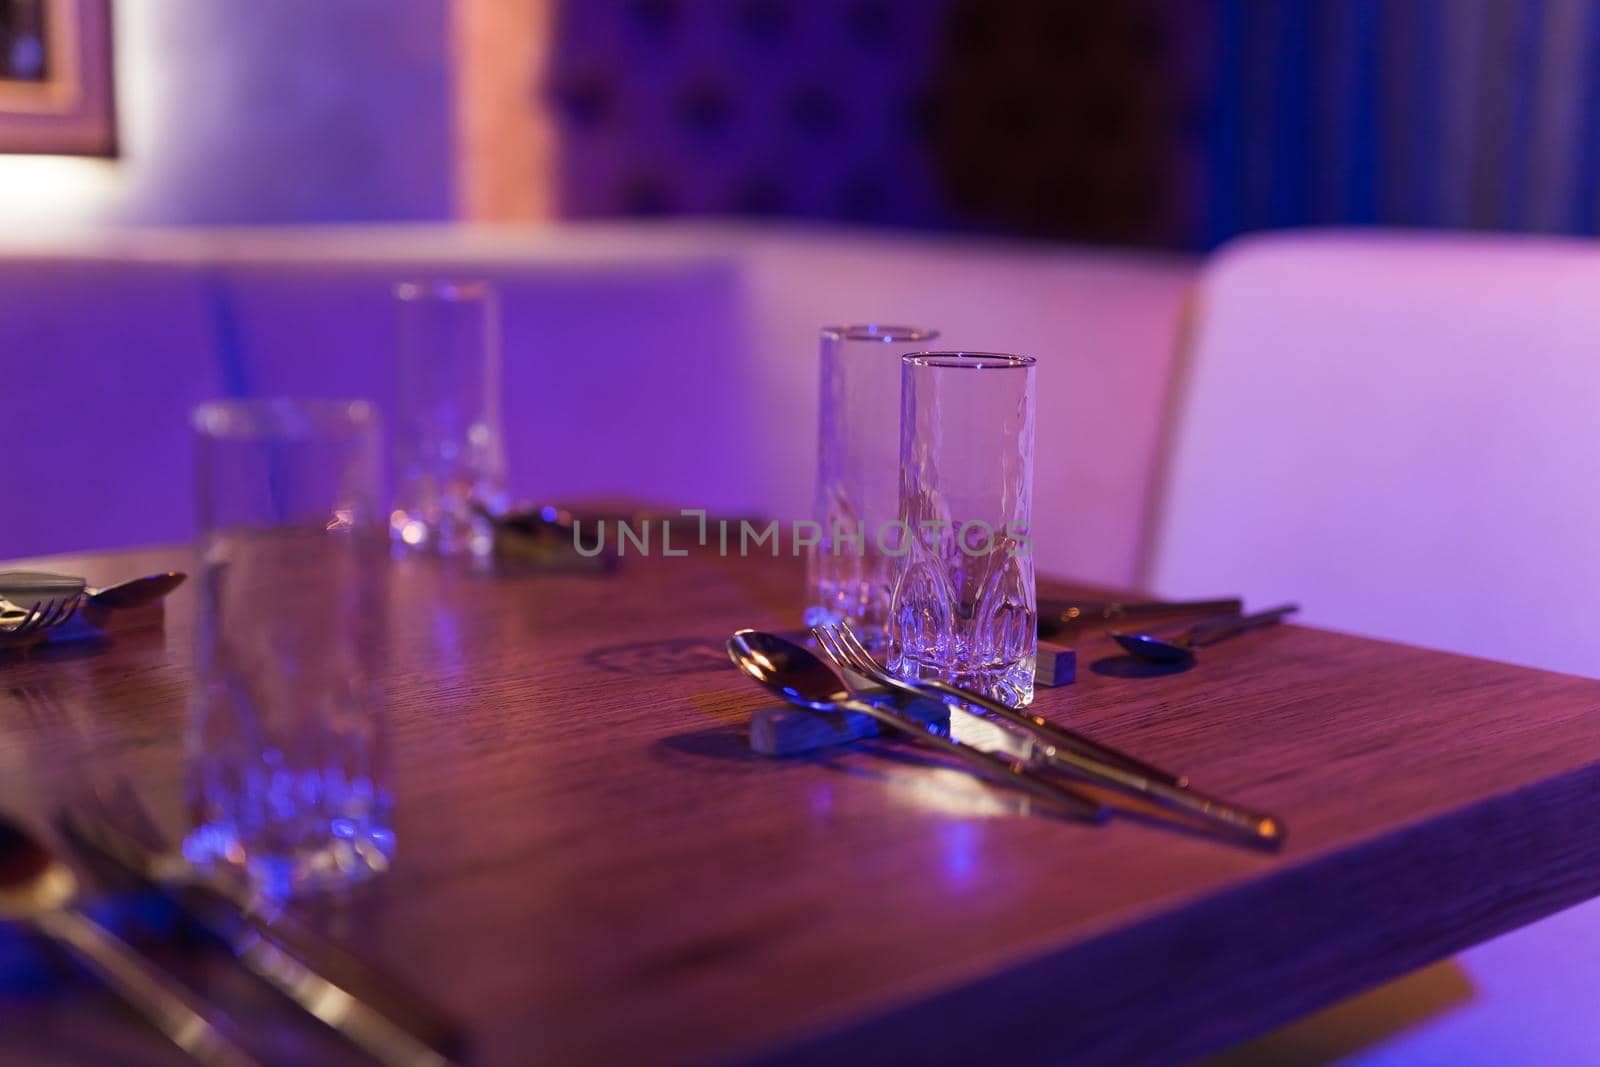 Served table with glasses and cutlery in a restaurant for dinner, closeup view by Satura86